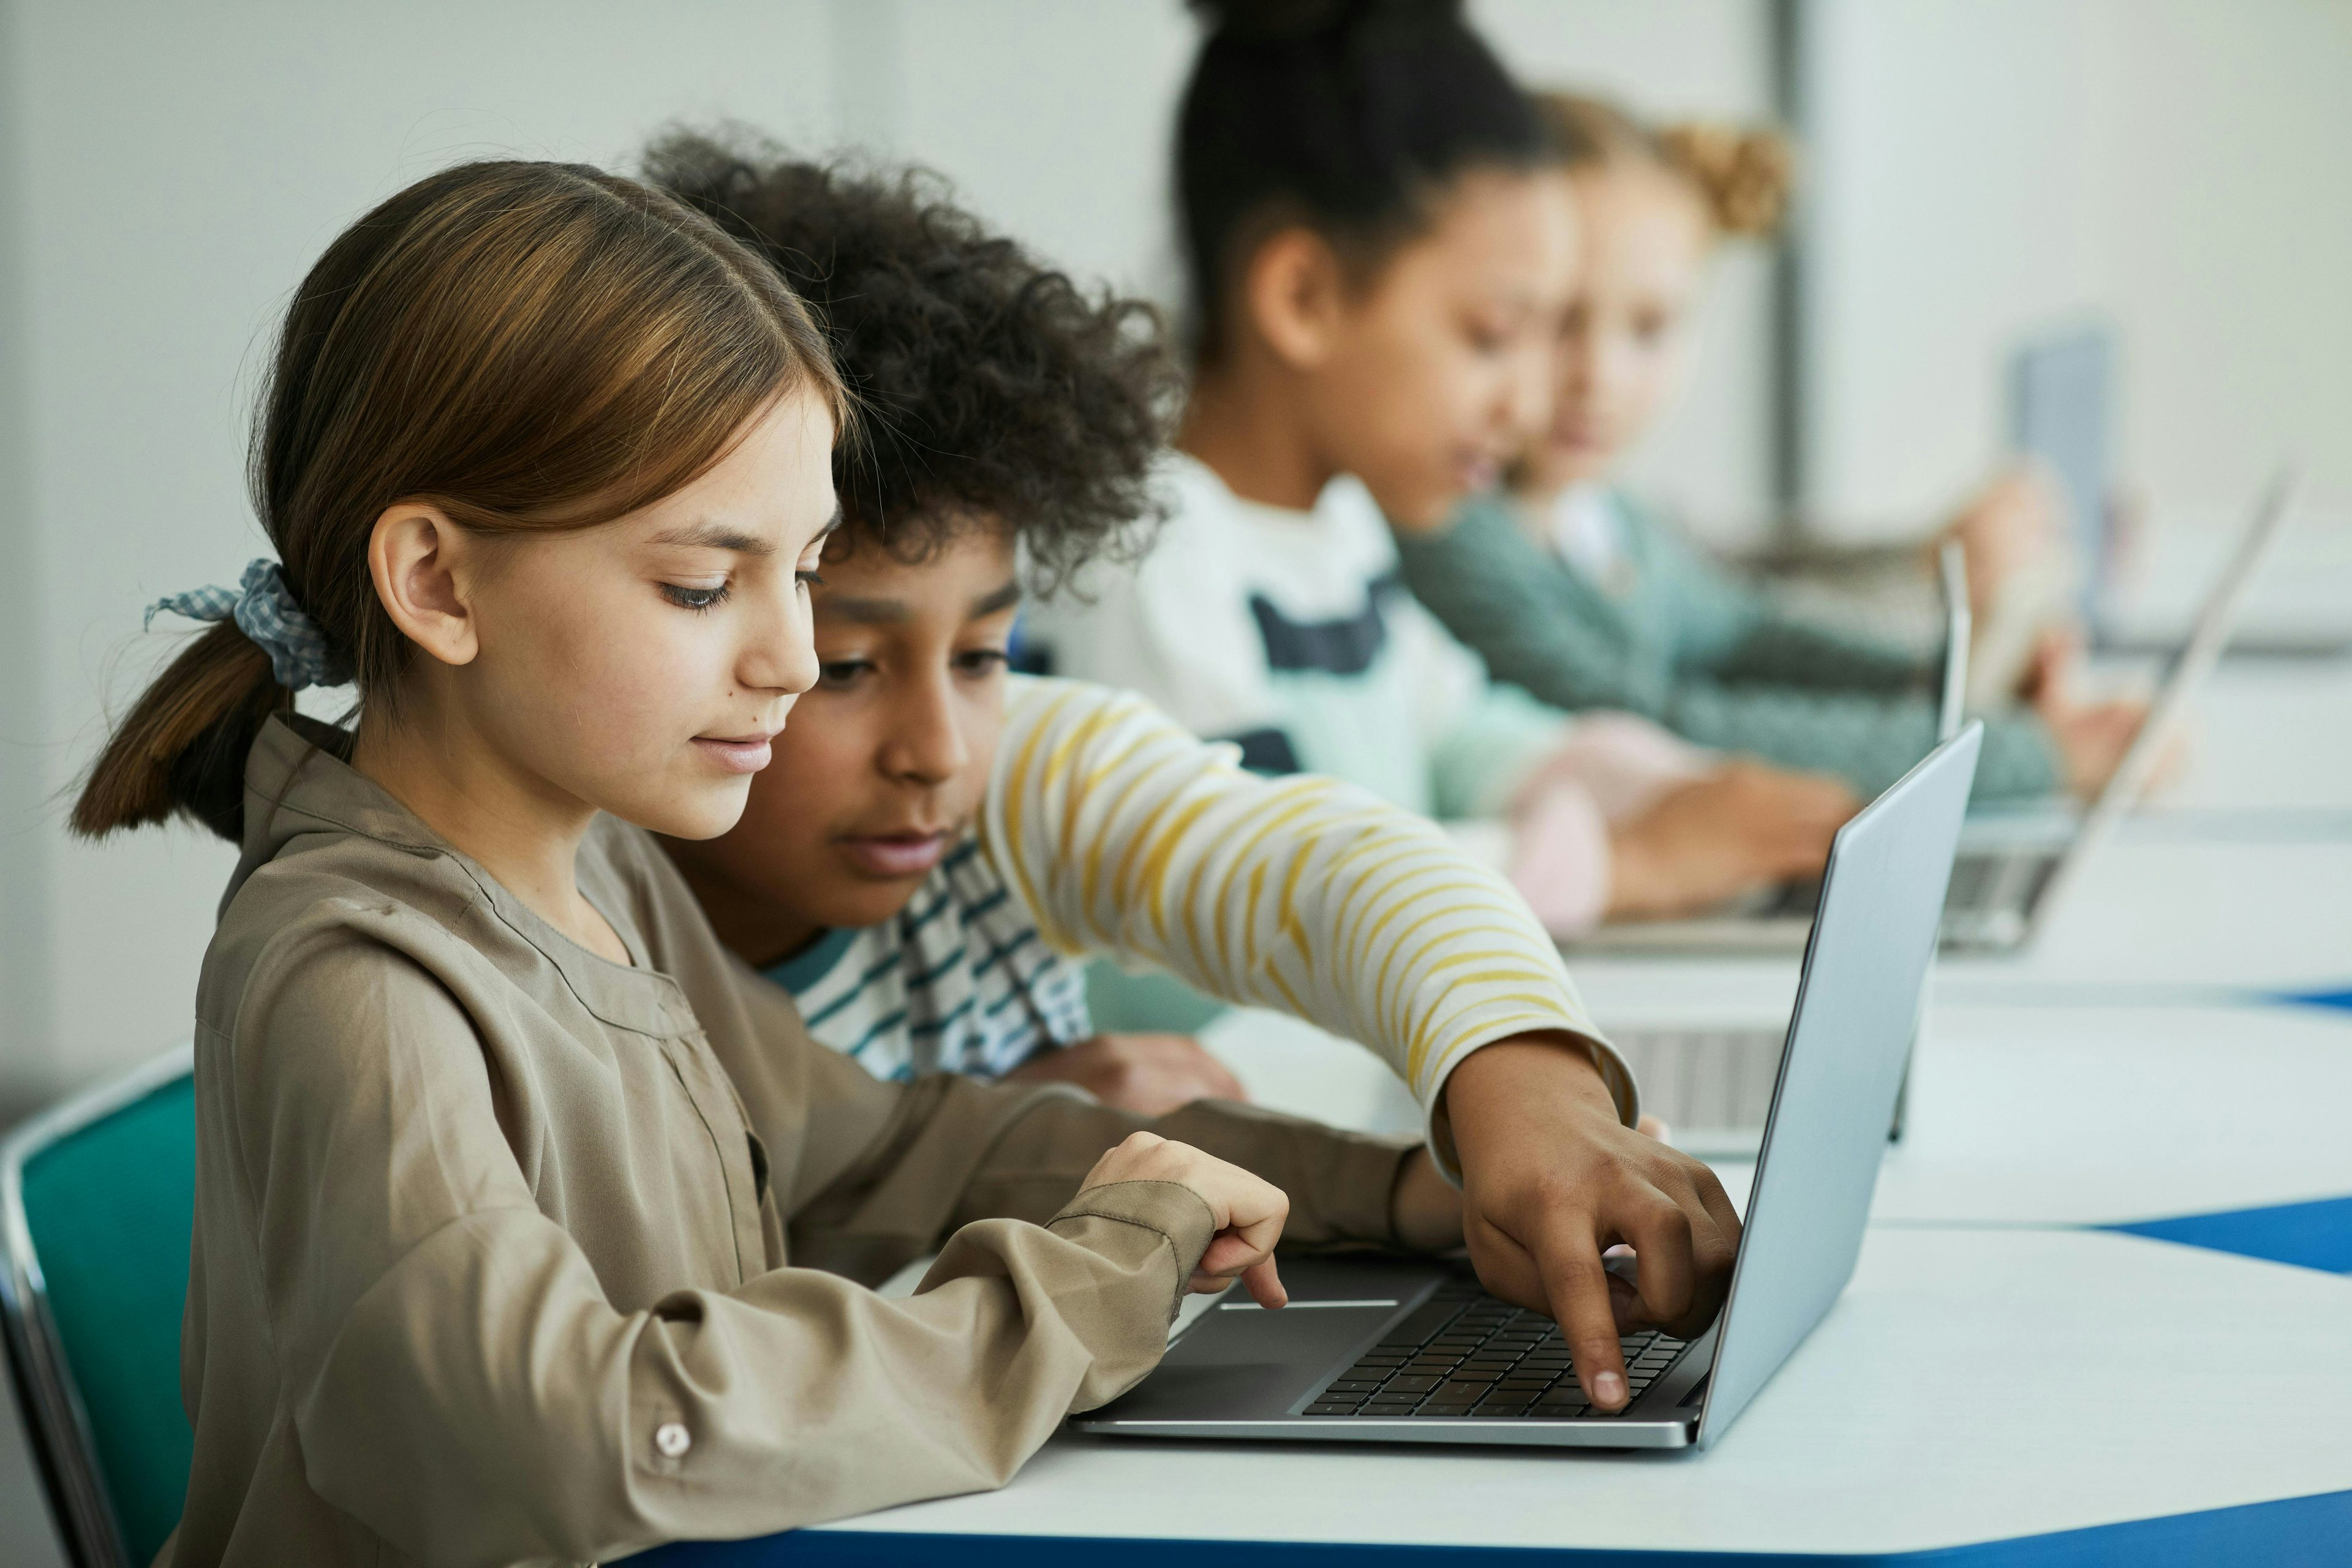 Children at a desk studying with laptops